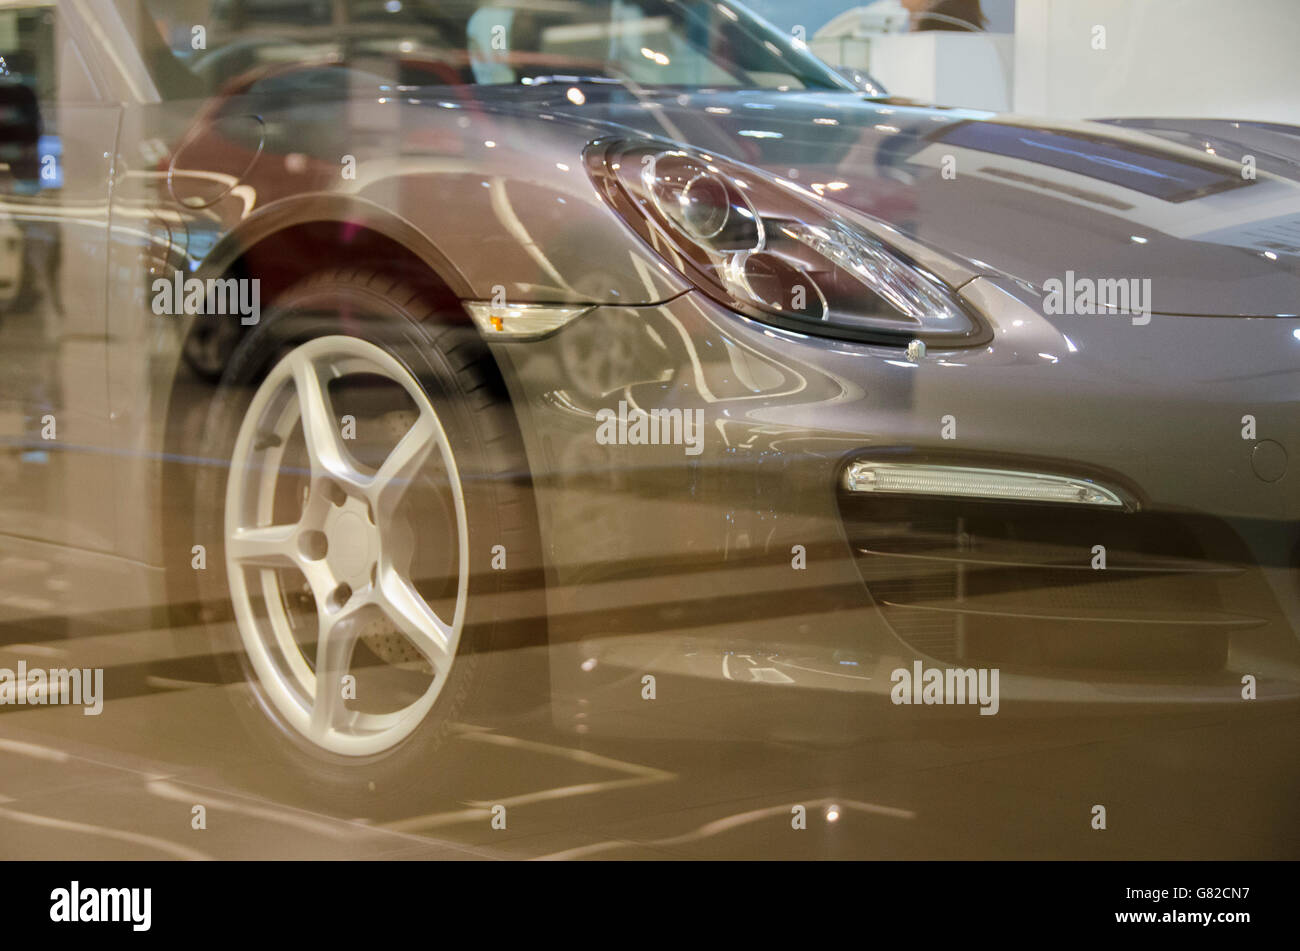 Cropped image of car seen through glass at showroom Stock Photo